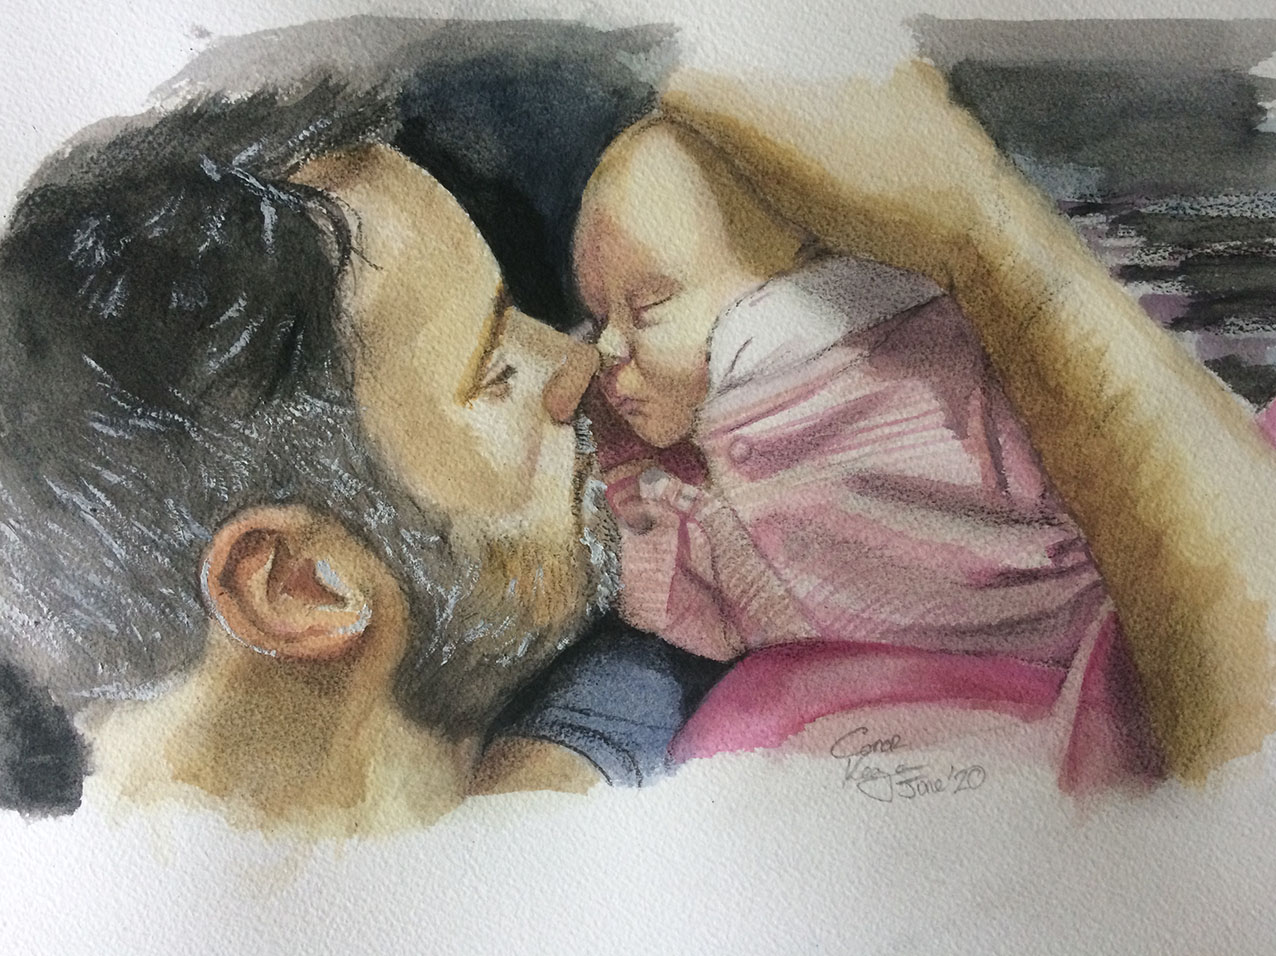 father & child painting